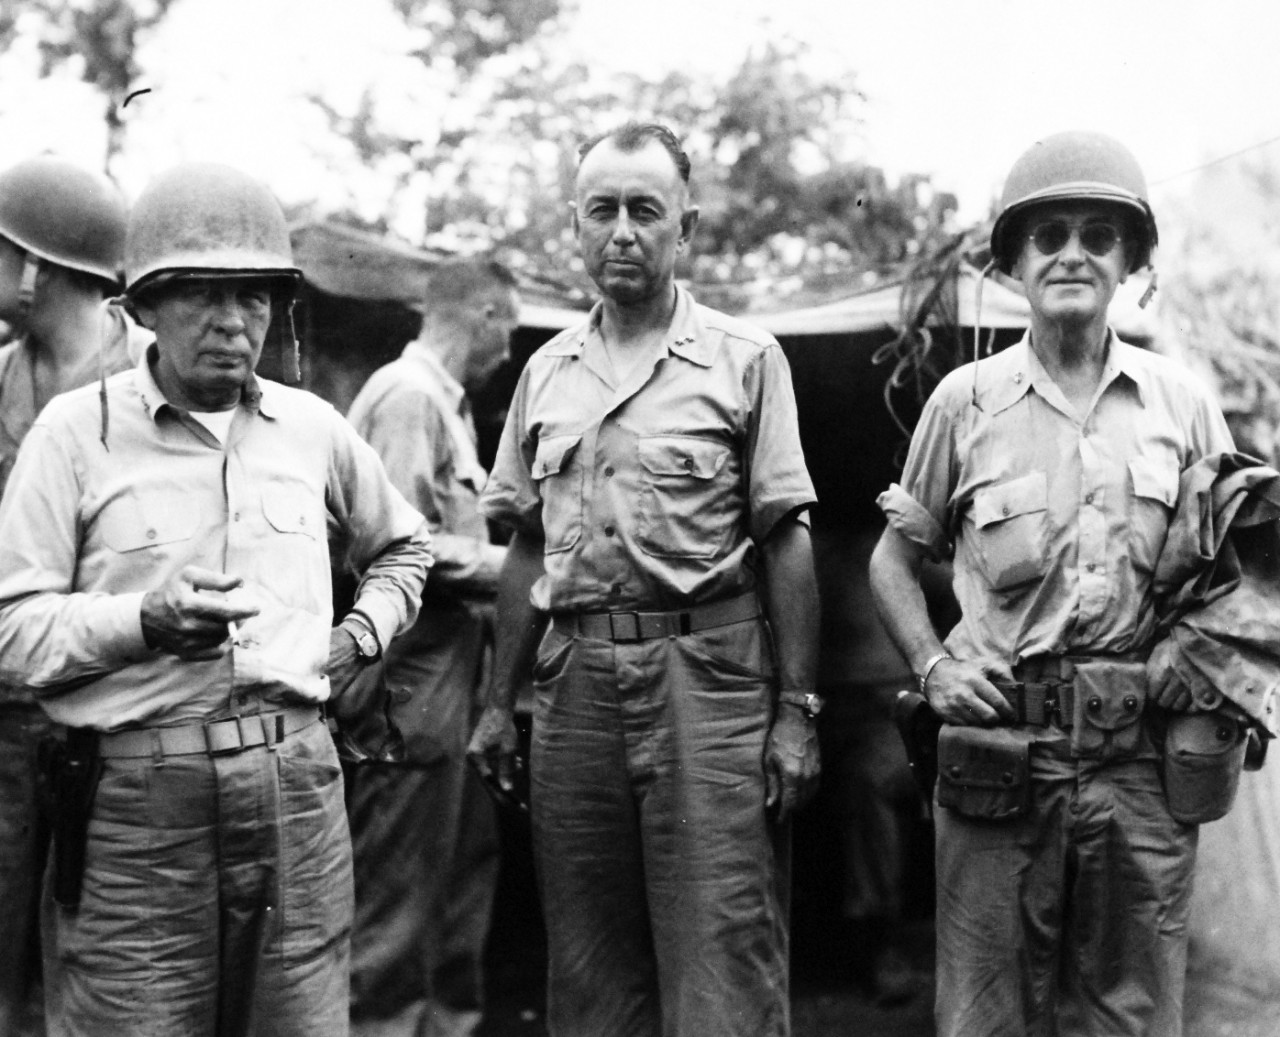 80-G-239319:  Invasion of Tinian, July-August 1944.   Two U.S. Marine Generals confer with Rear Admiral W. Chambers, (right), USN, Inspector Medical Department Activities, Pacific Area, on Tinian, where the Admiral was inspecting medical facilities.  The Marine officers are Major Generals Harry Schmidt (left) and Clifton B. Cates, released August 5, 1944.    Official U.S. Navy photograph, now in the collections of the National Archives.  (2017/03/07).